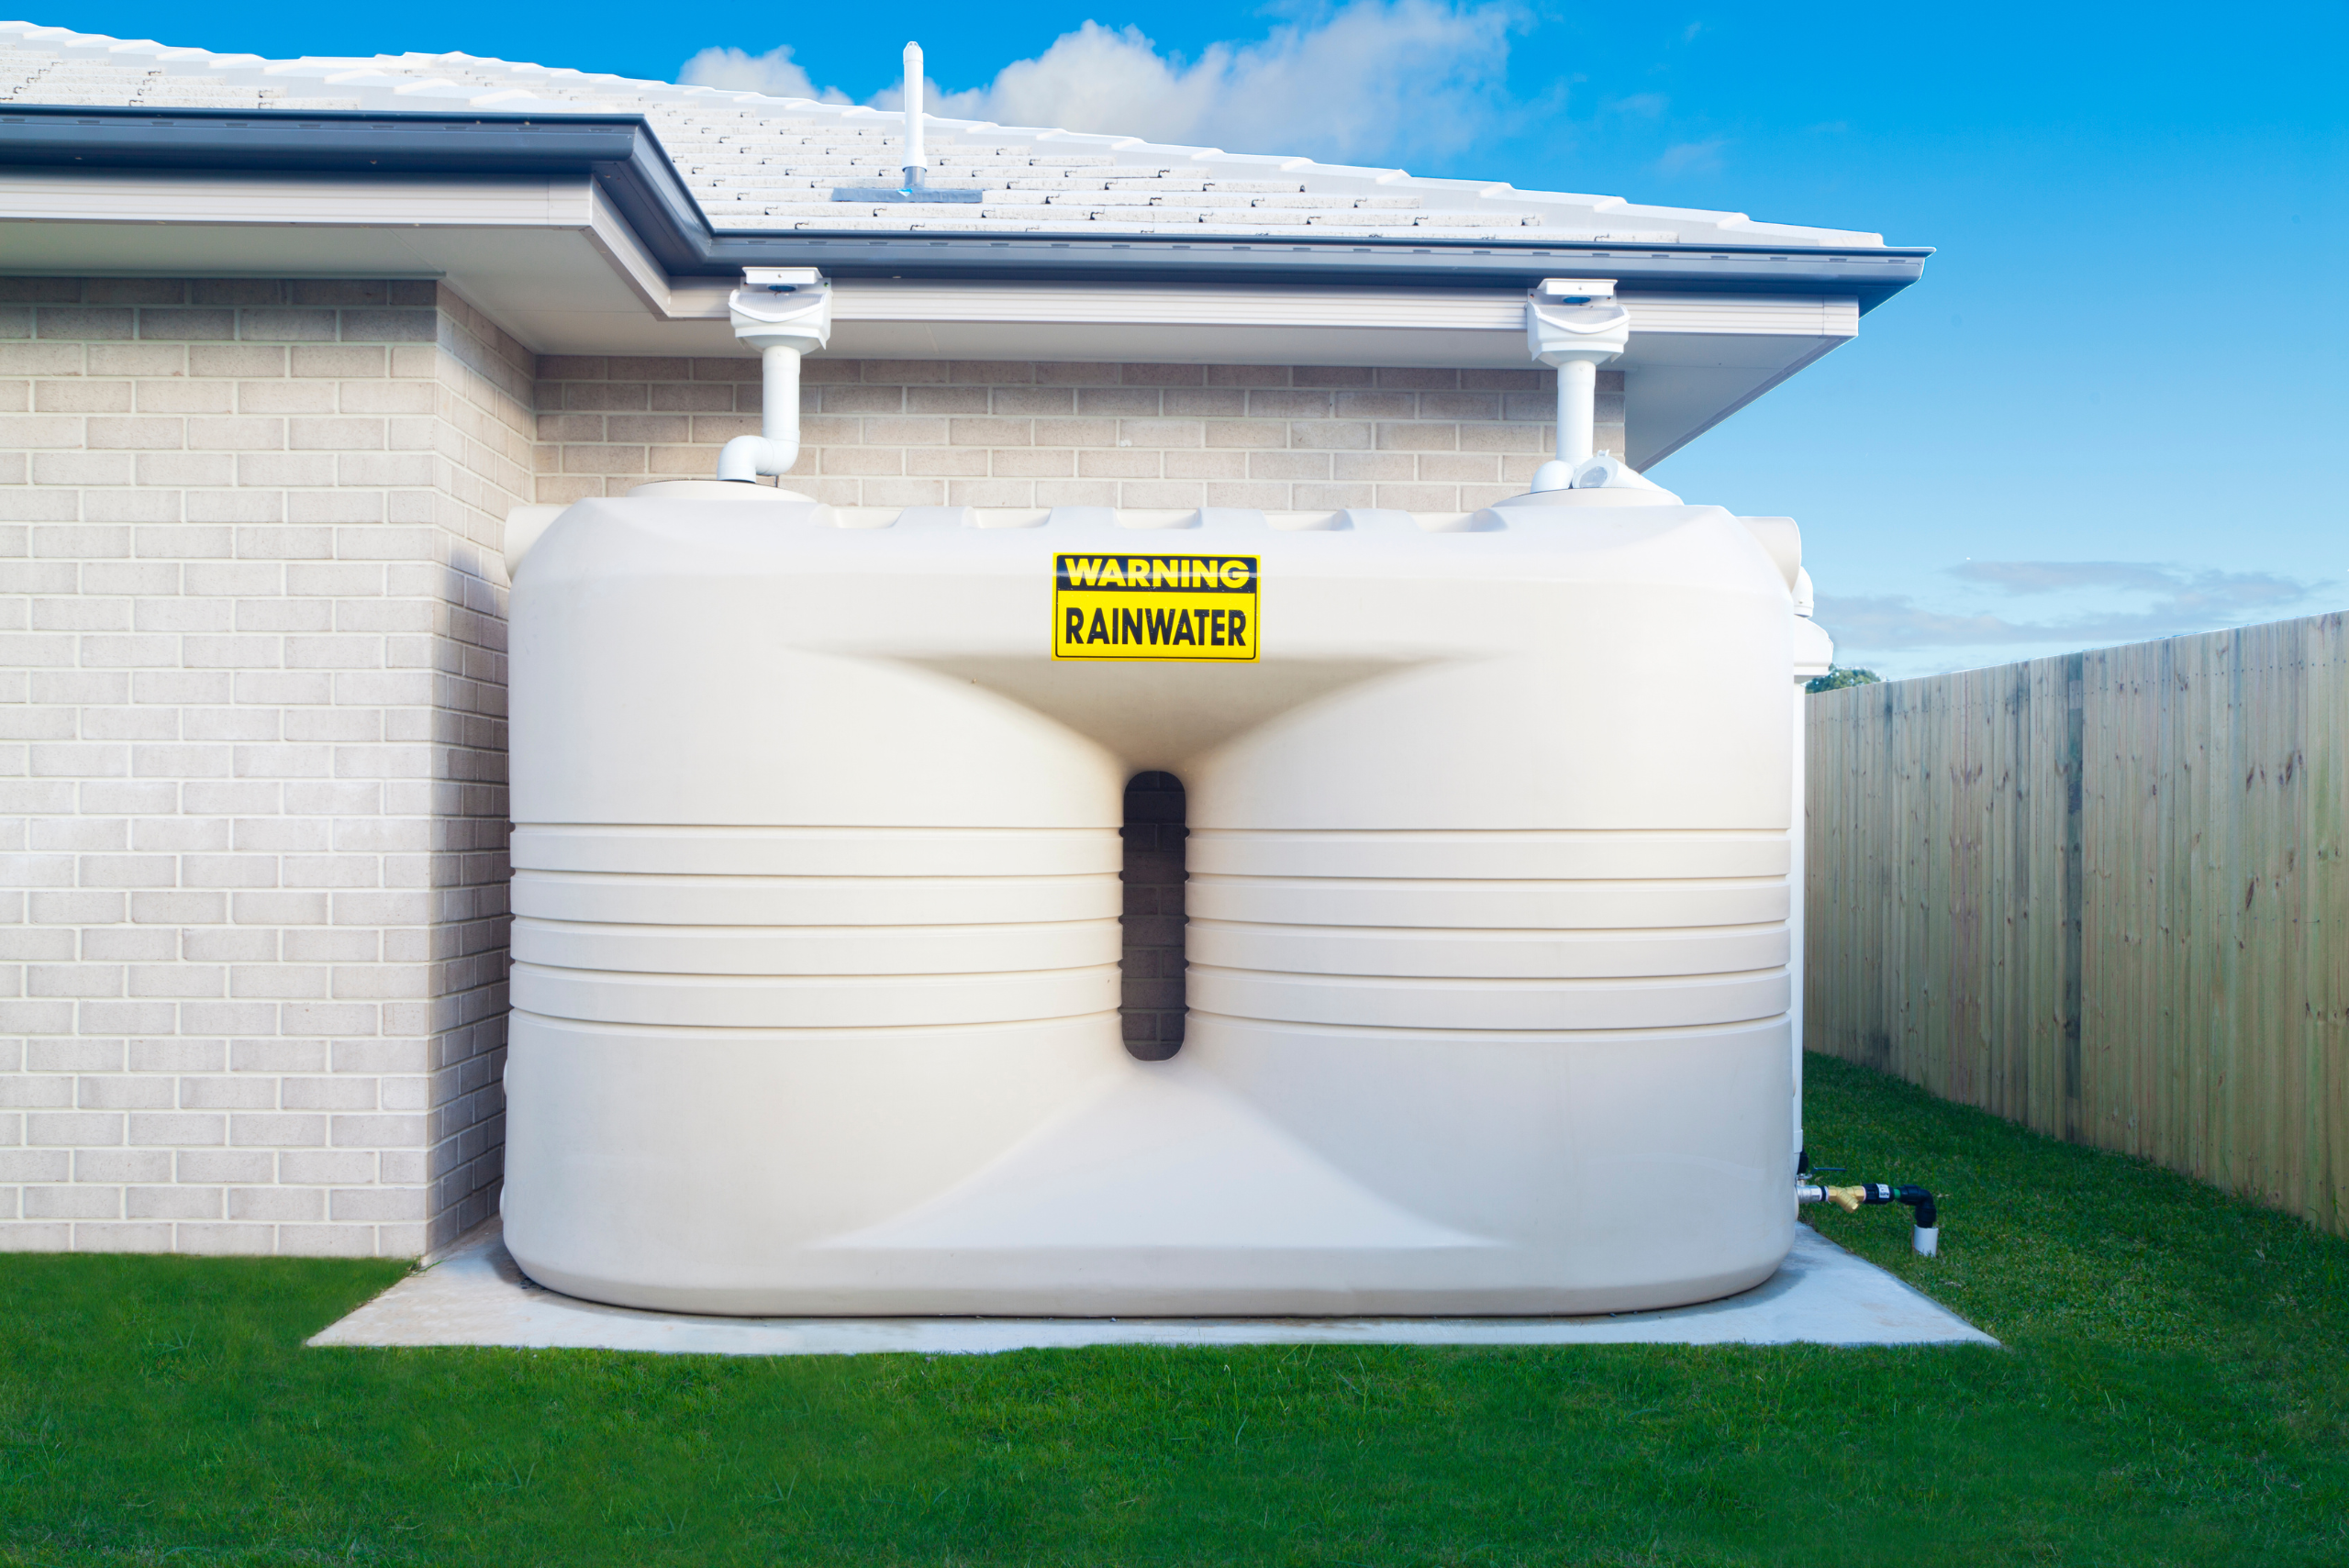 Large double rain barrel system for collecting water from the roof.